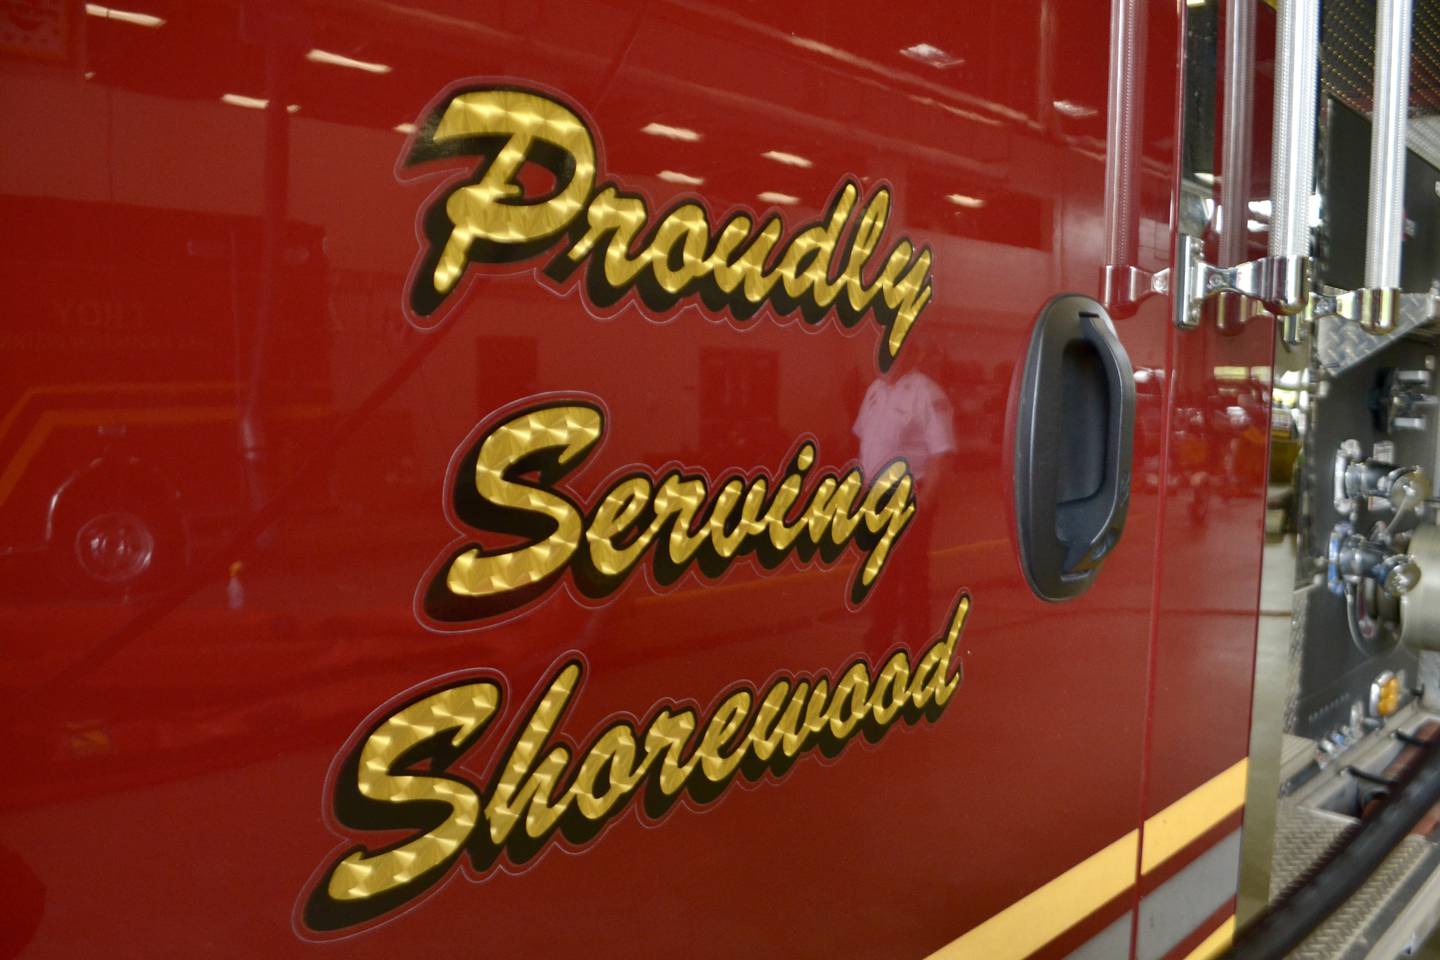 troy fire protection district, shorewood, fire fighters